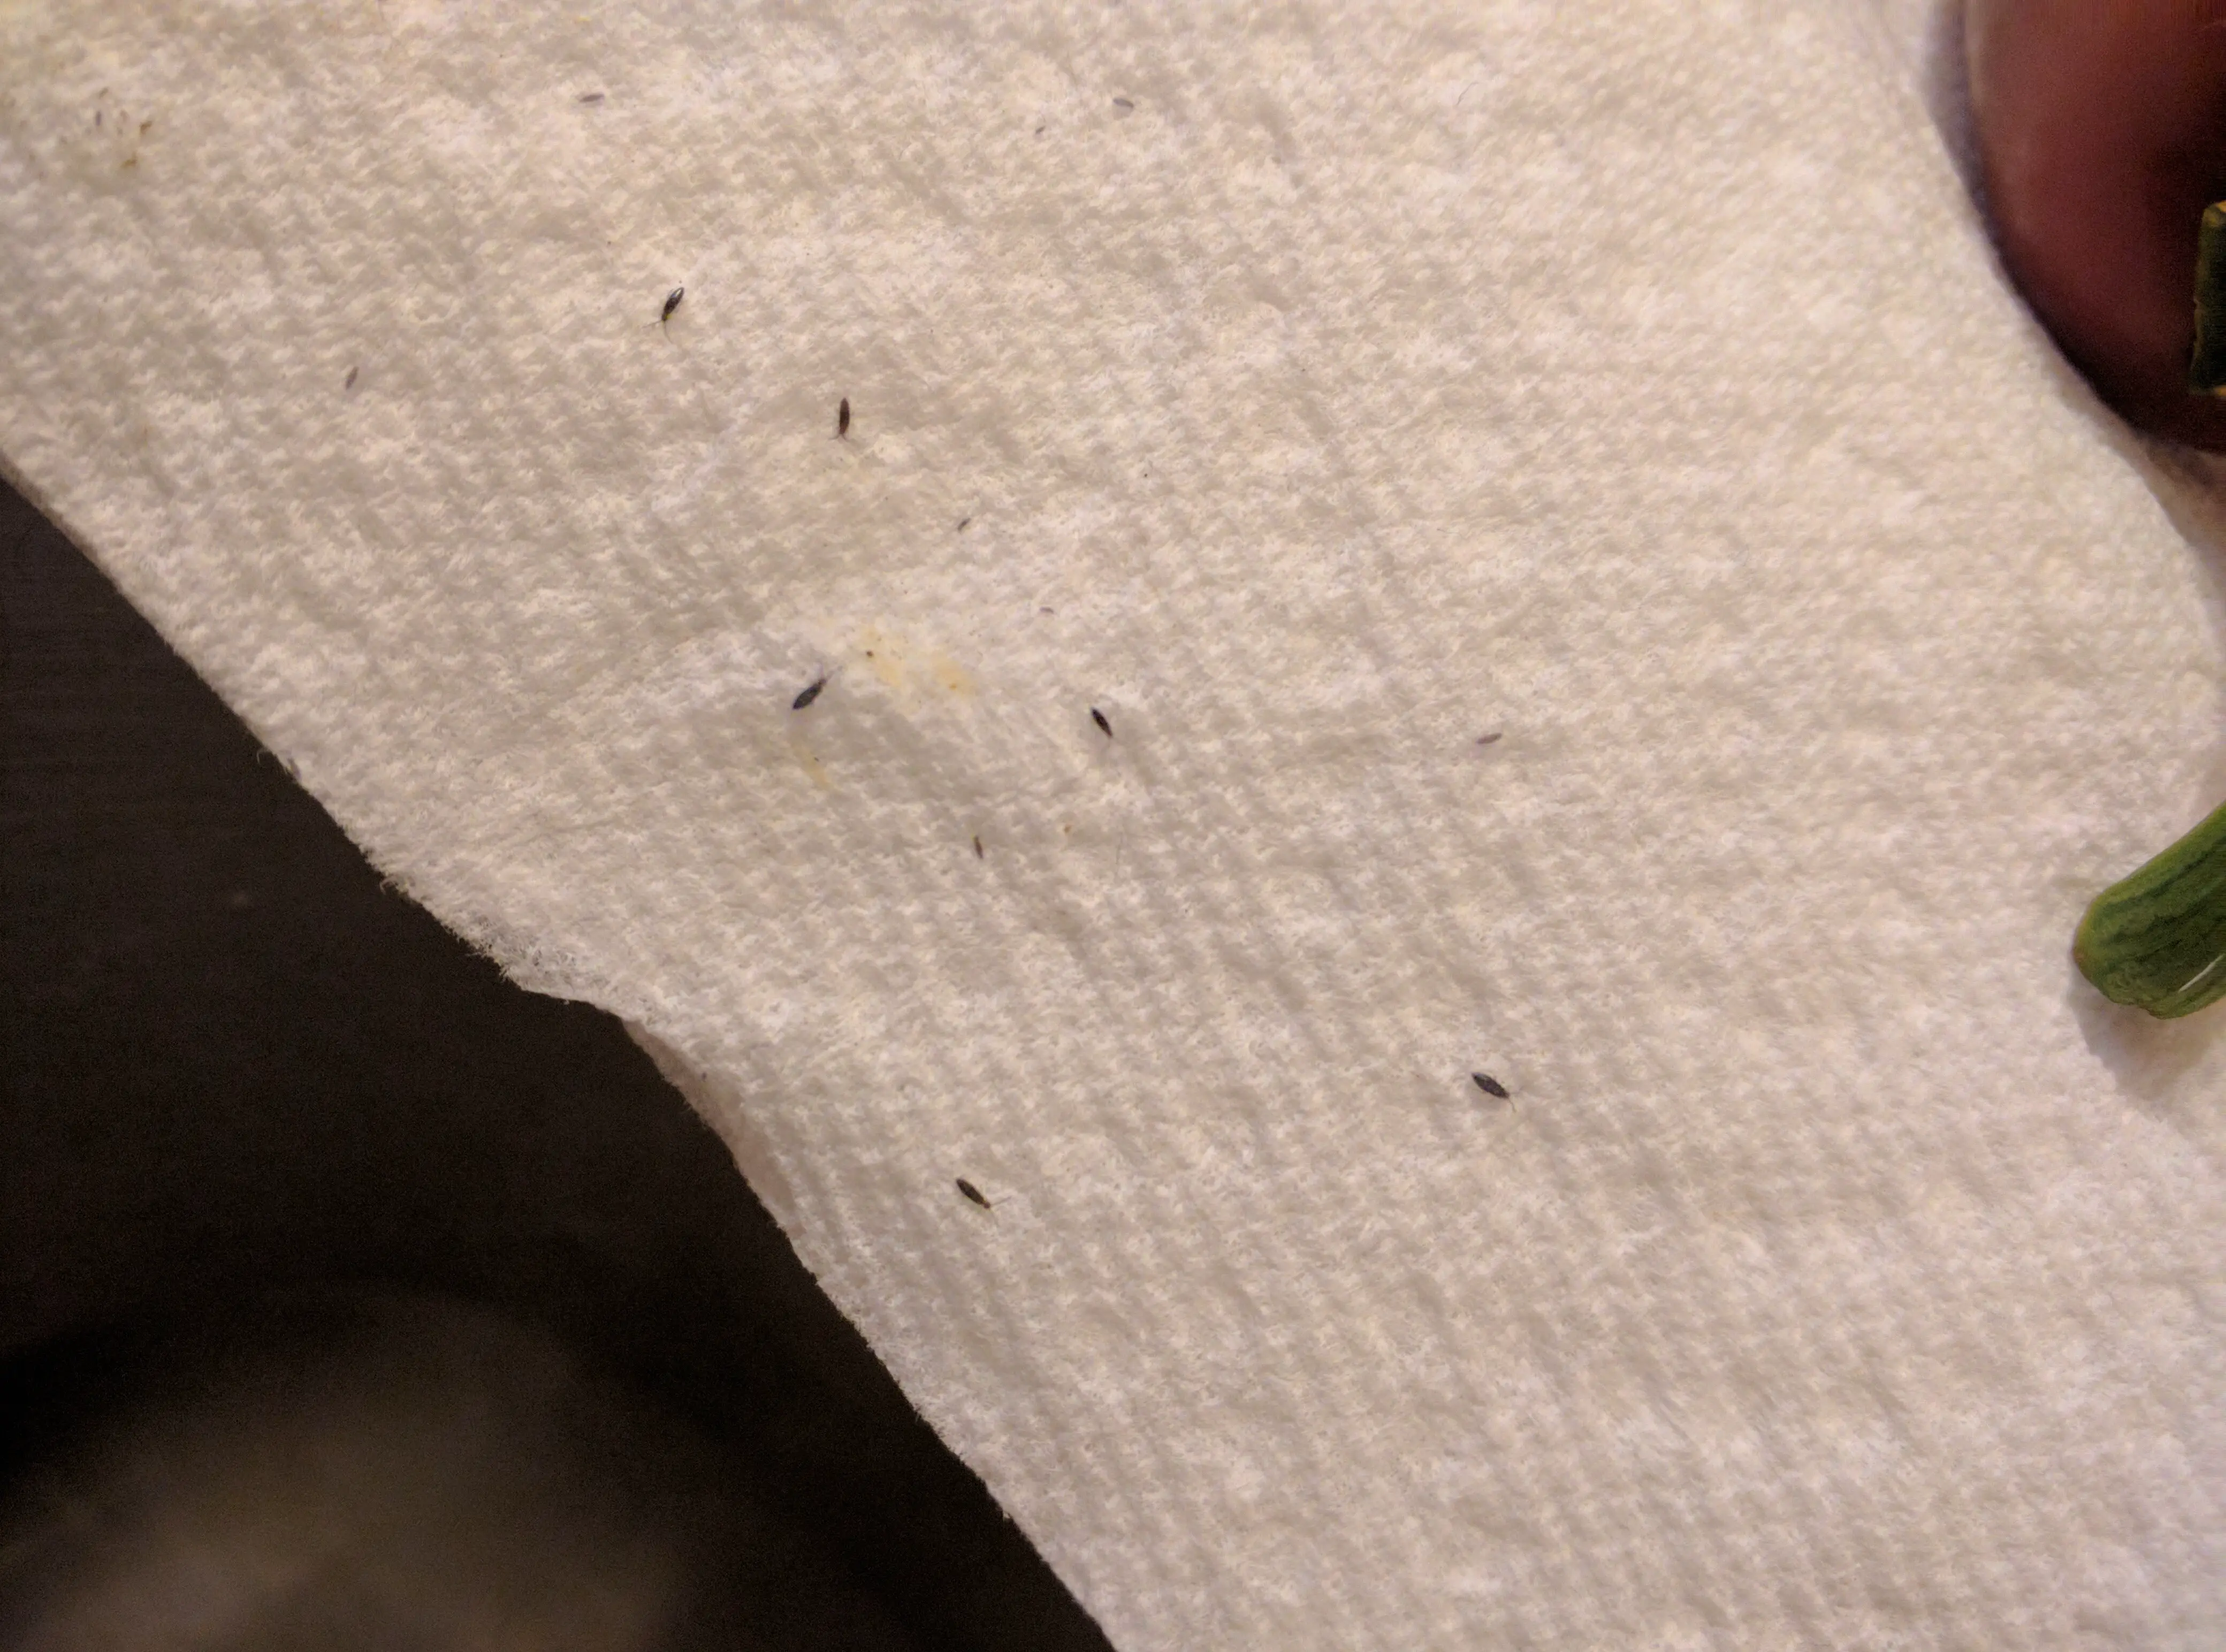 Tiny Black Bugs In Kitchen Pest Guide, Tiny Black Bugs In The Kitchen Cabinet